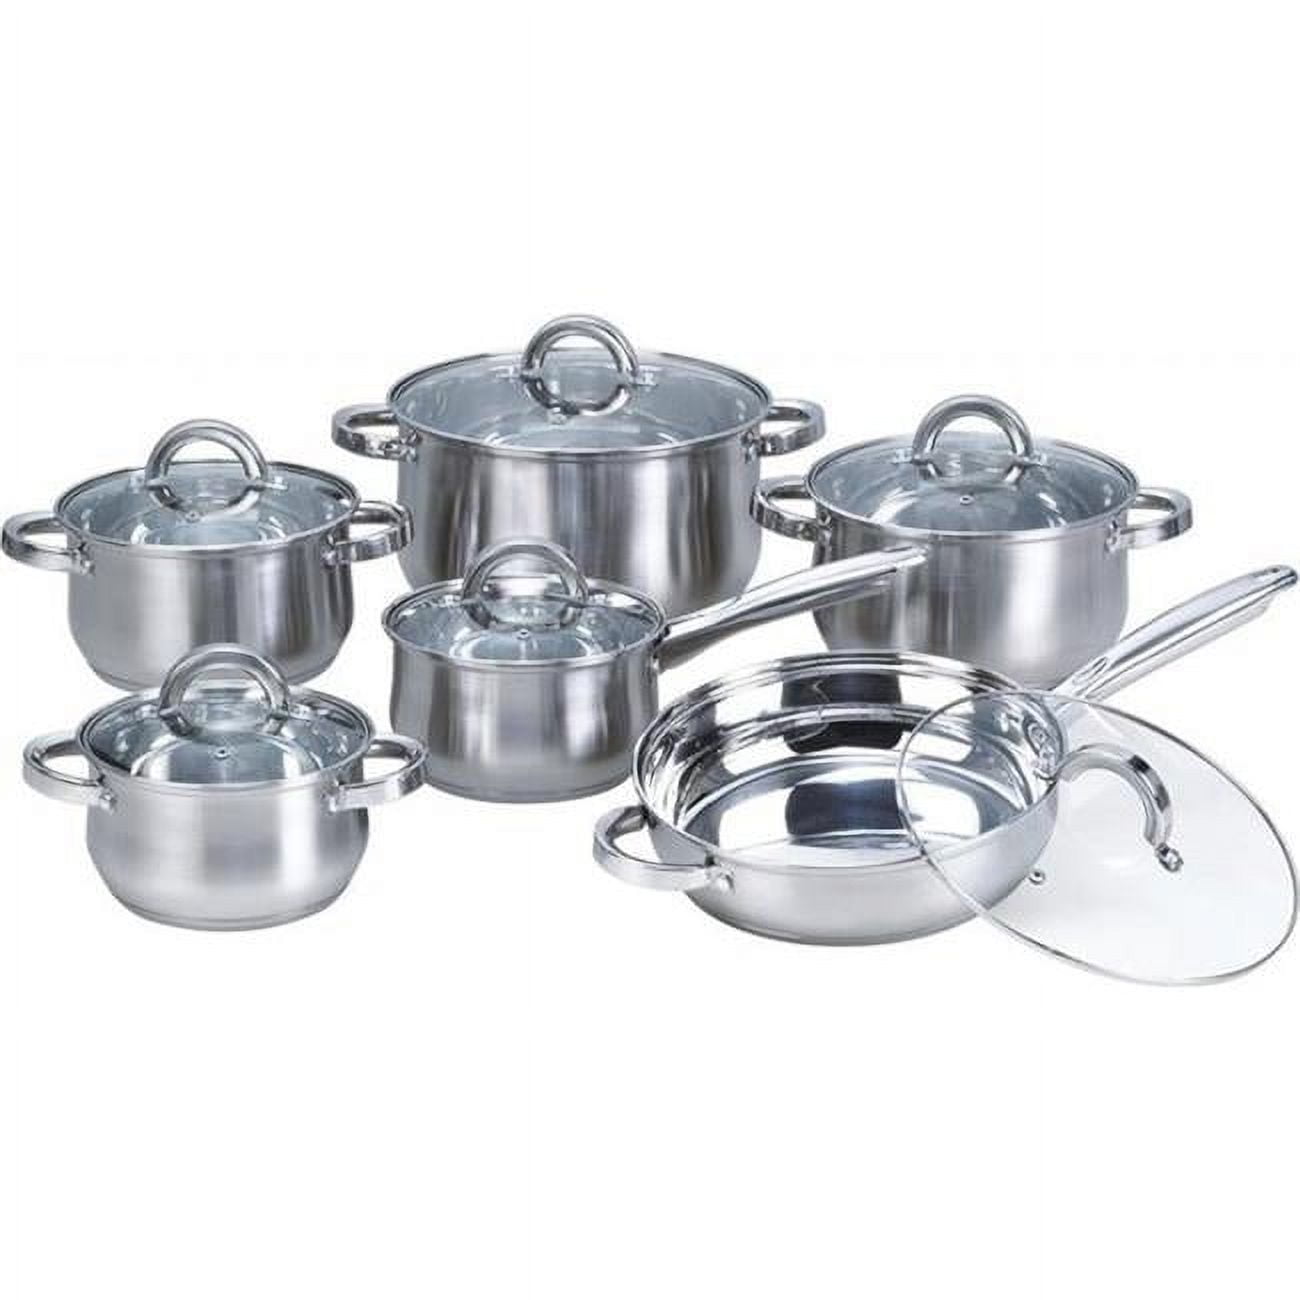 Picture of Heim Concept W-001 12-piece Stainless Steel Cookware Set with Glass Lid